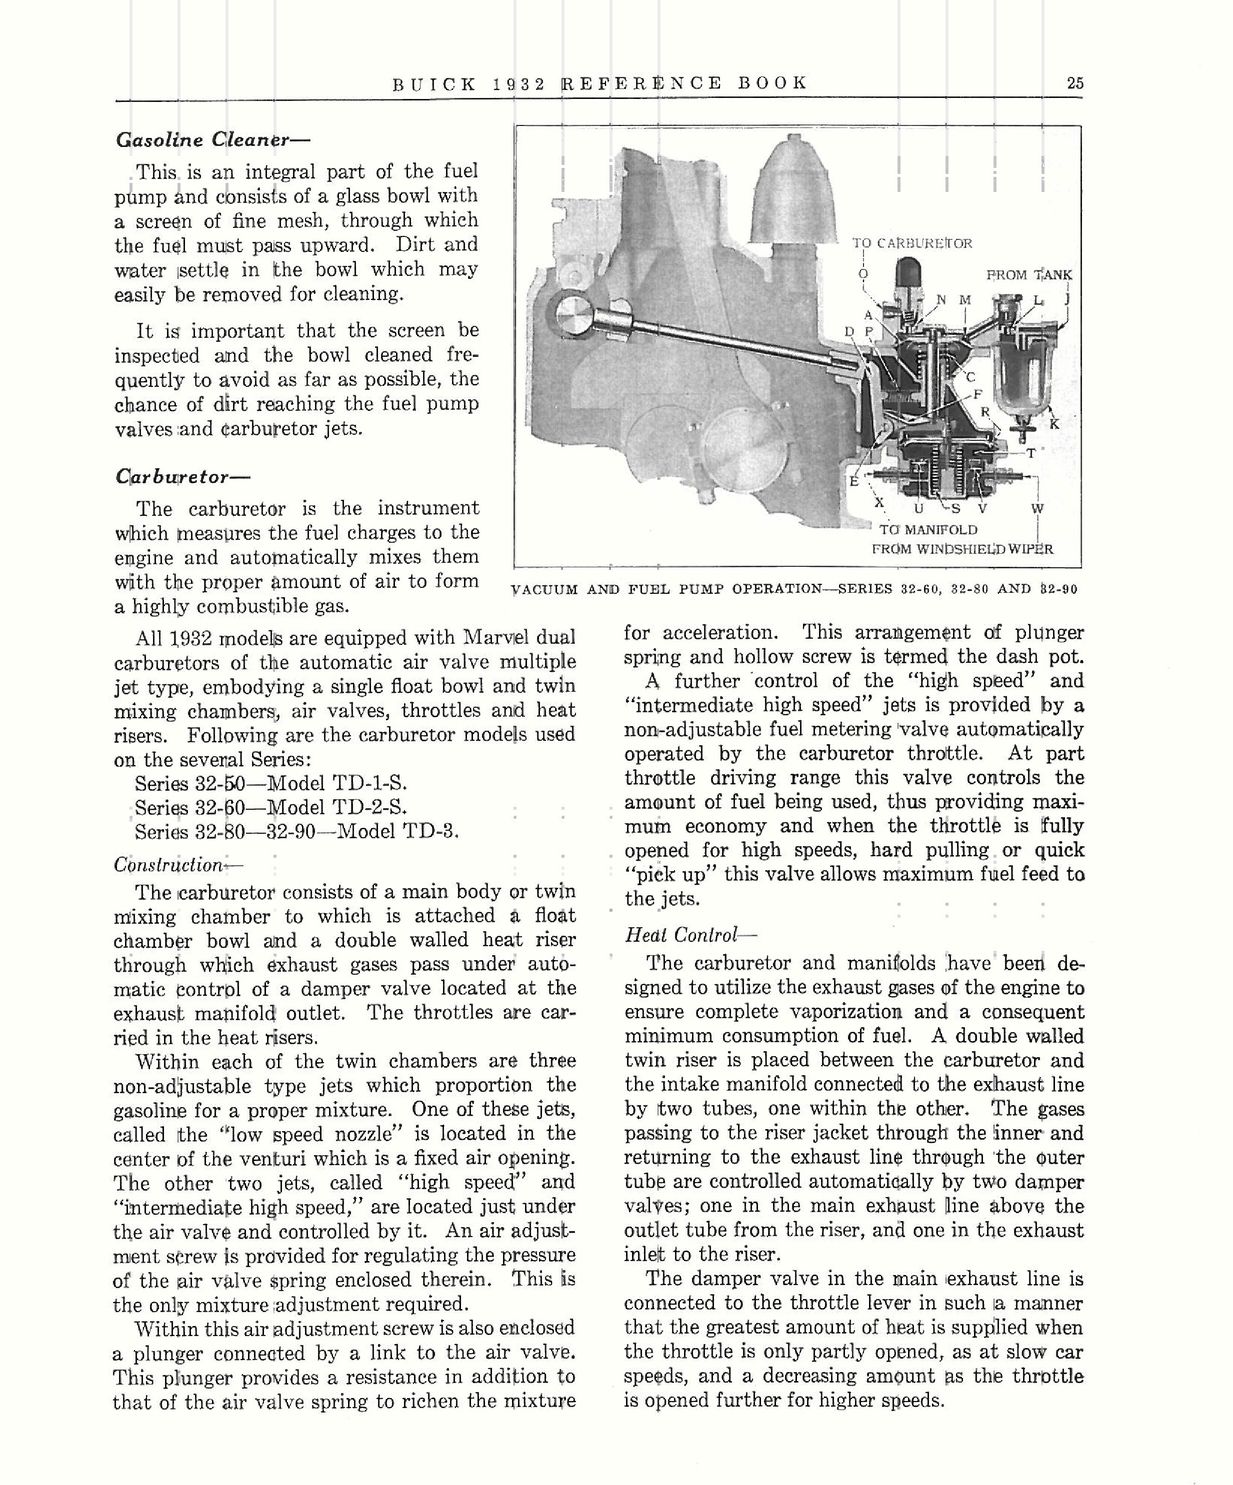 1932 Buick Reference Book-25